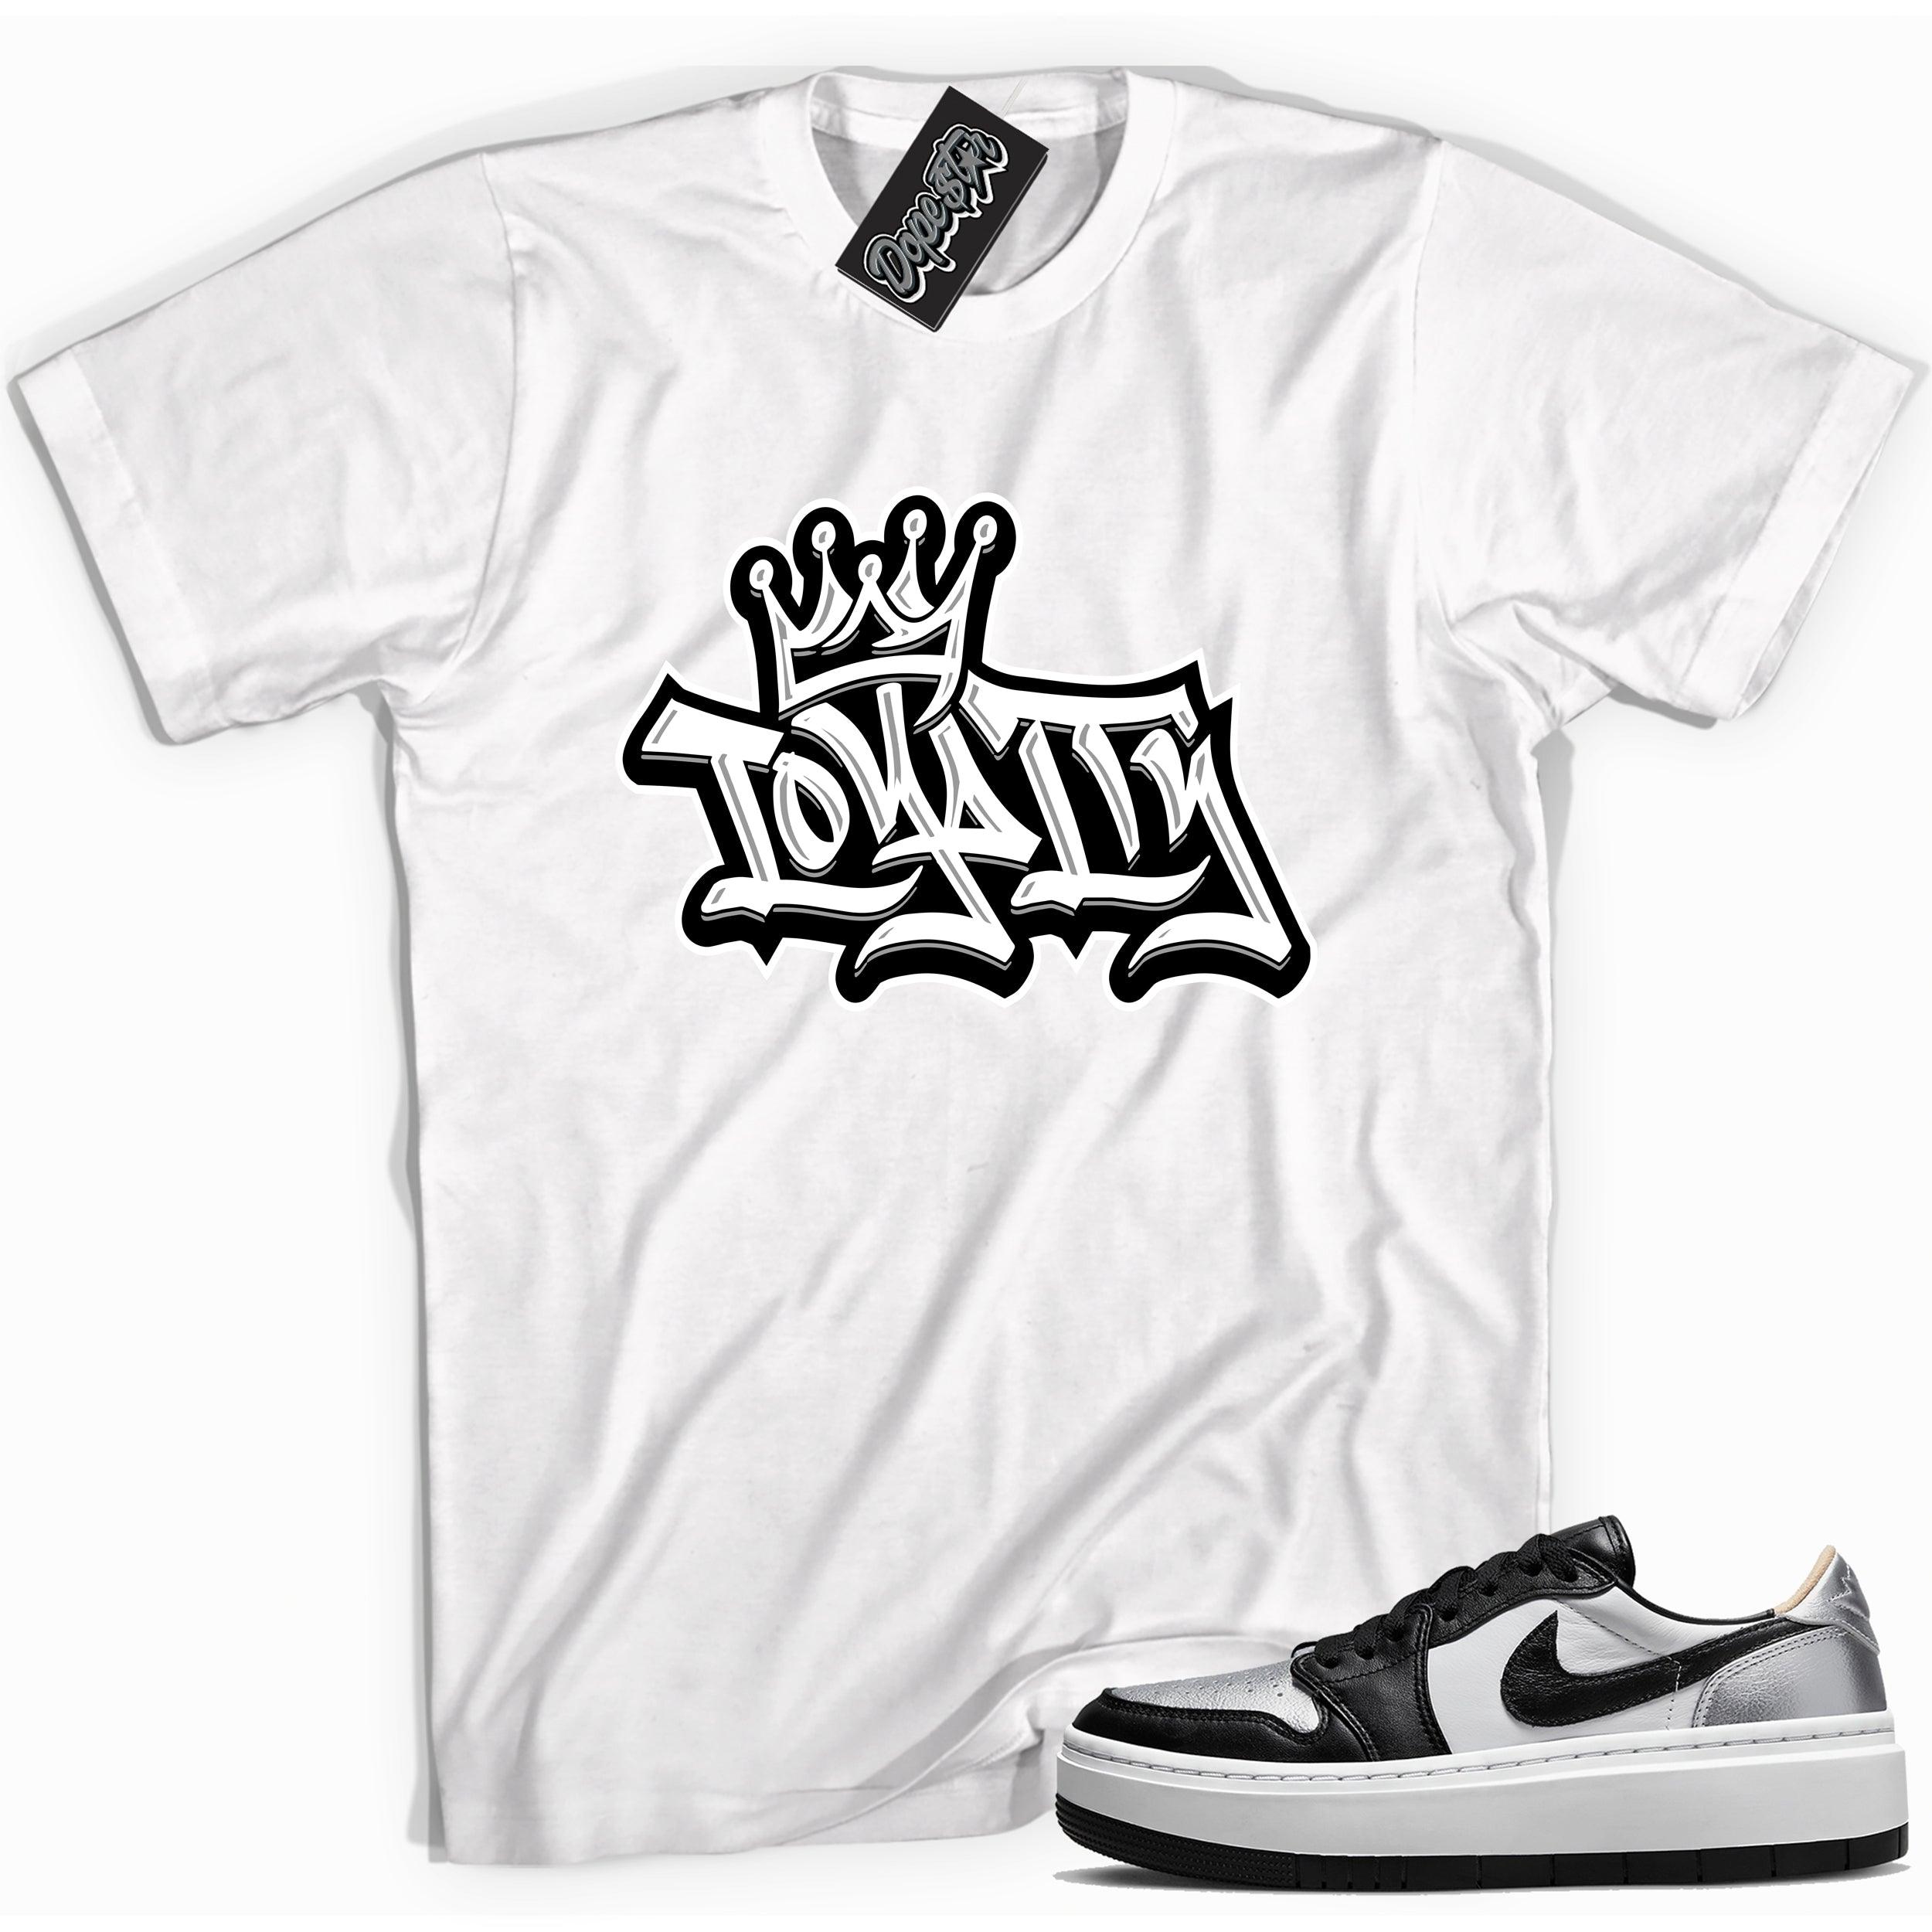 Cool white graphic tee with 'loyalty' print, that perfectly matches Air Jordan 1 Elevate Low SE Silver Toe sneakers.